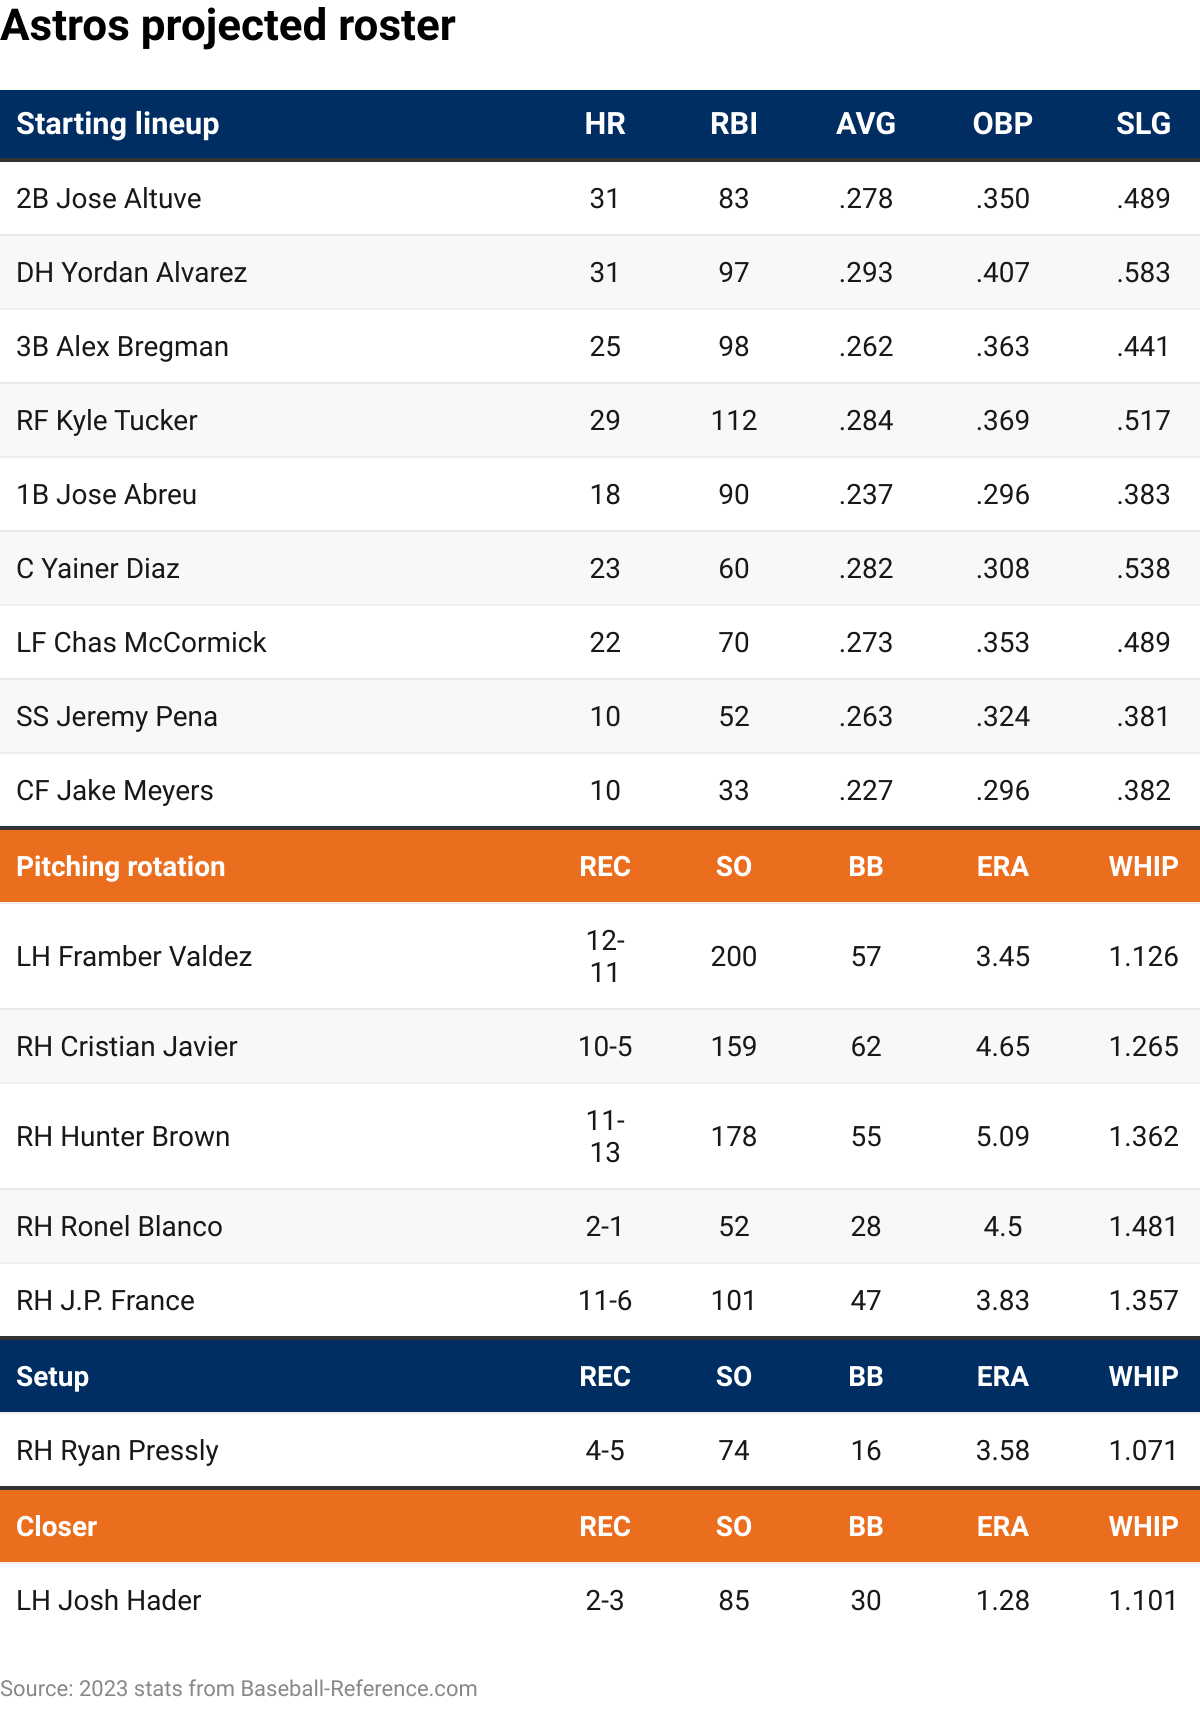 The Houston Astros' projected 2024 lineup with 2023 stats.